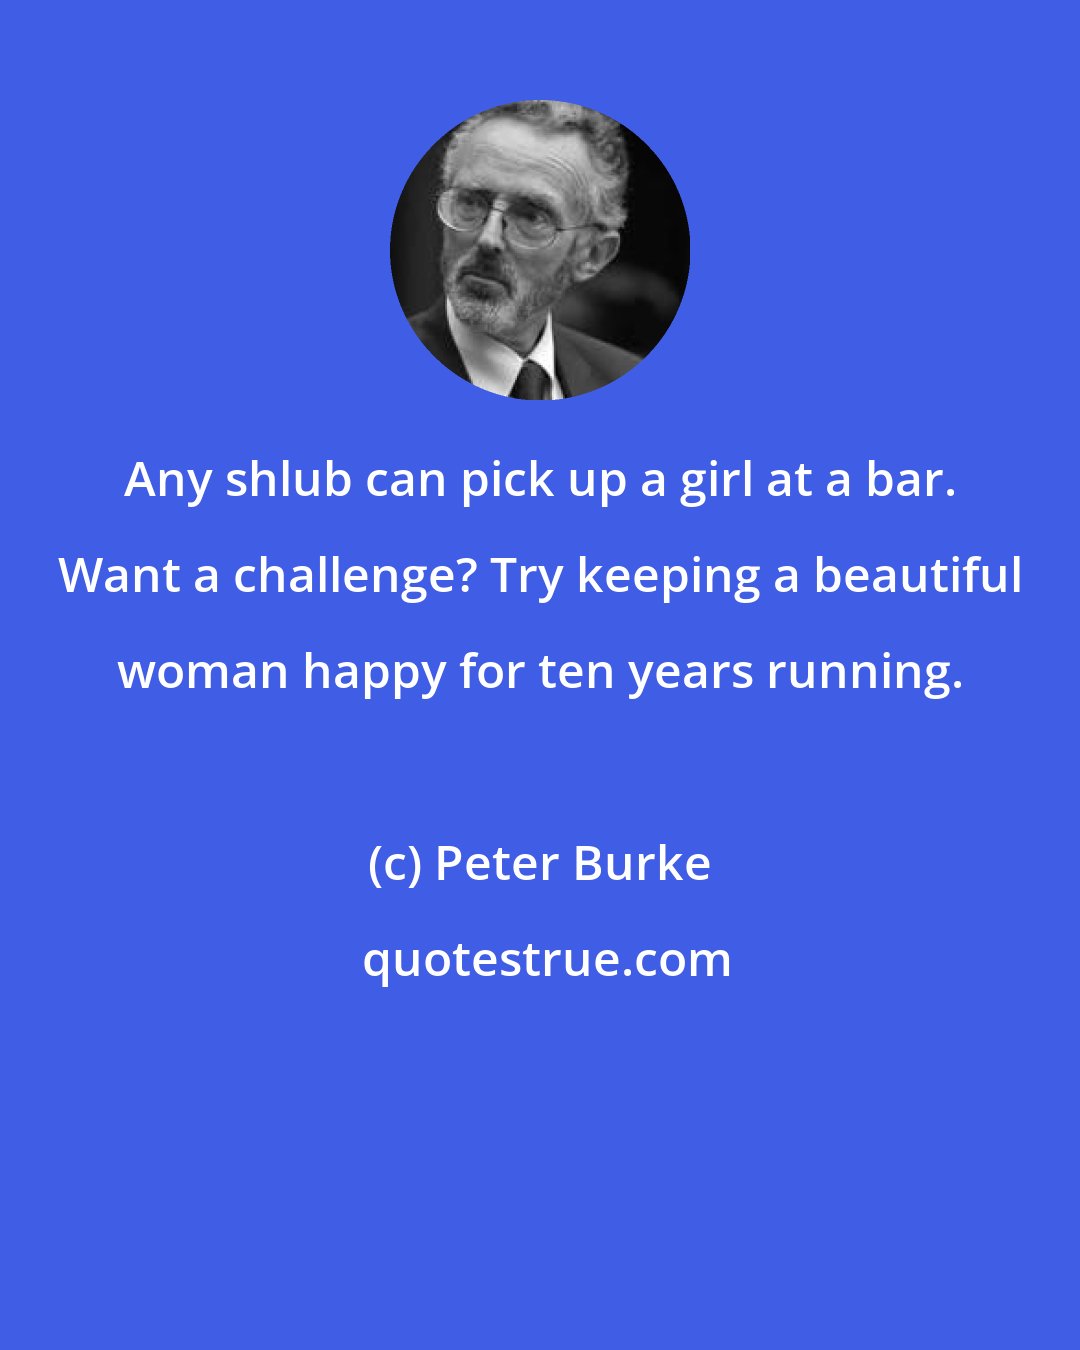 Peter Burke: Any shlub can pick up a girl at a bar. Want a challenge? Try keeping a beautiful woman happy for ten years running.